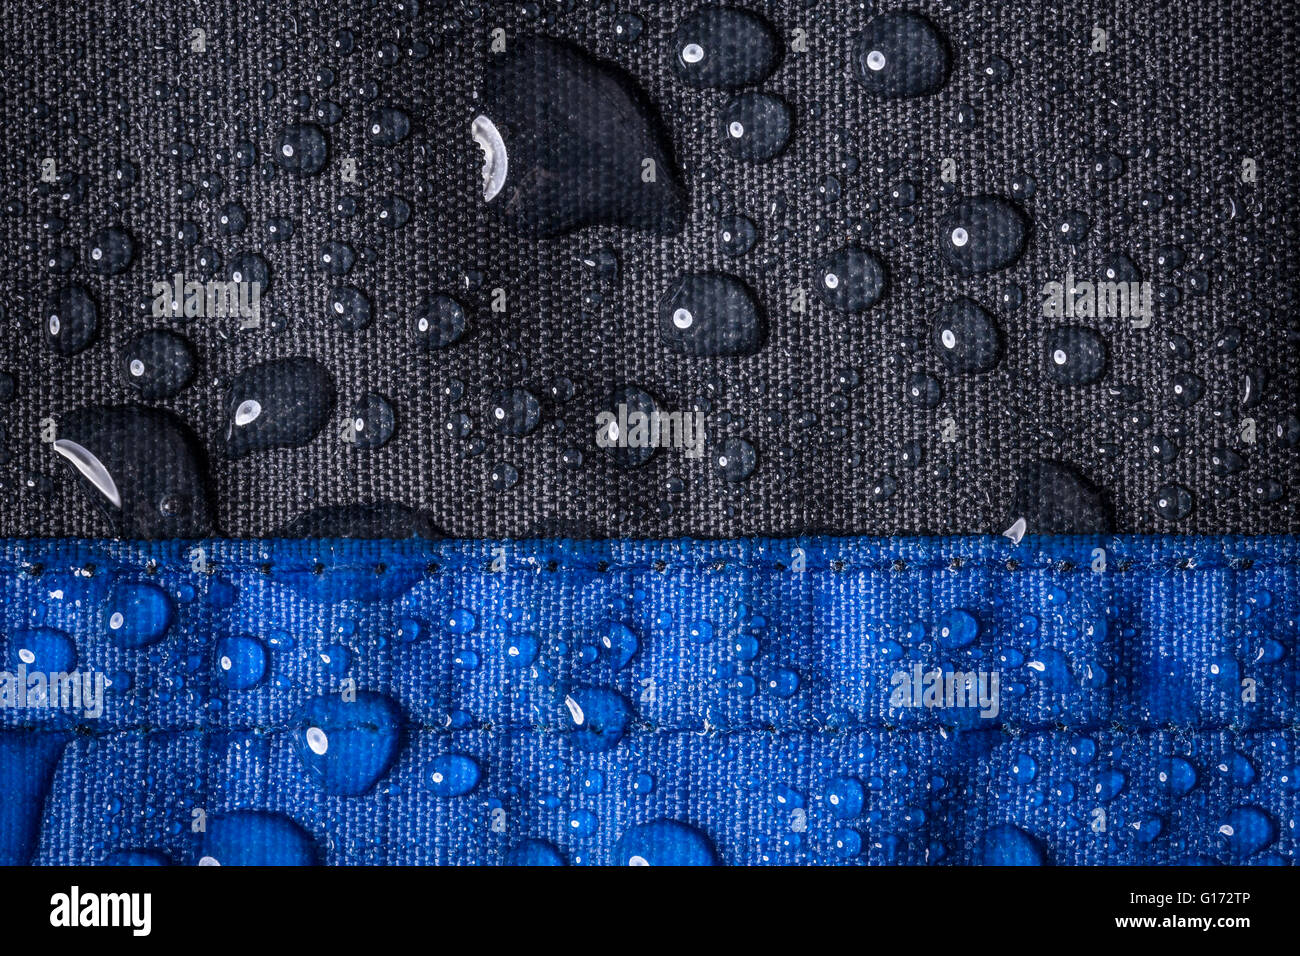 Drops of water on waterproof cloth Stock Photo